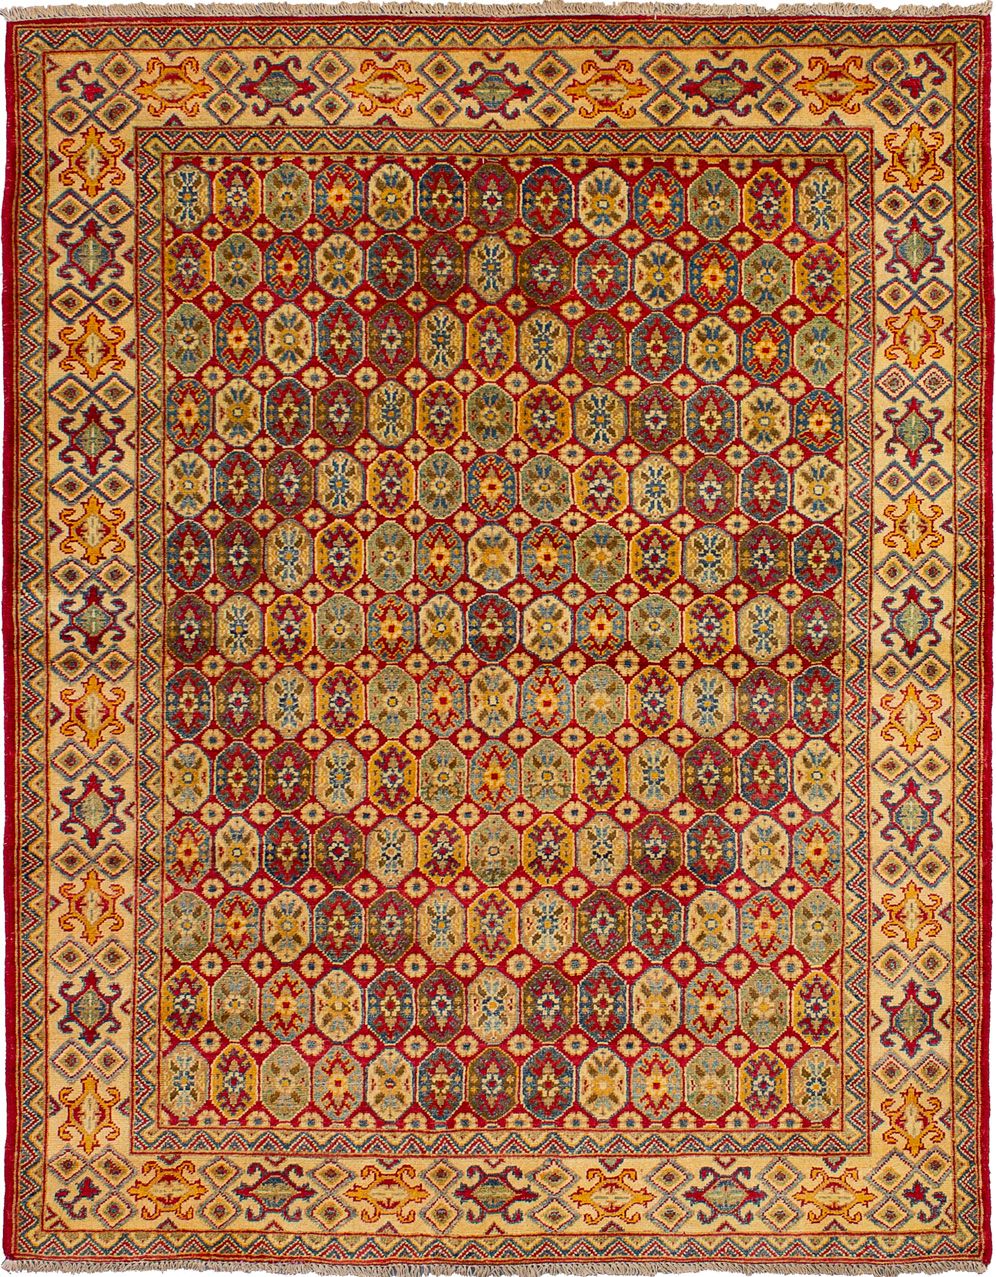 Hand-knotted Finest Gazni Red Wool Rug 5'1" x 6'5"  Size: 5'1" x 6'5"  